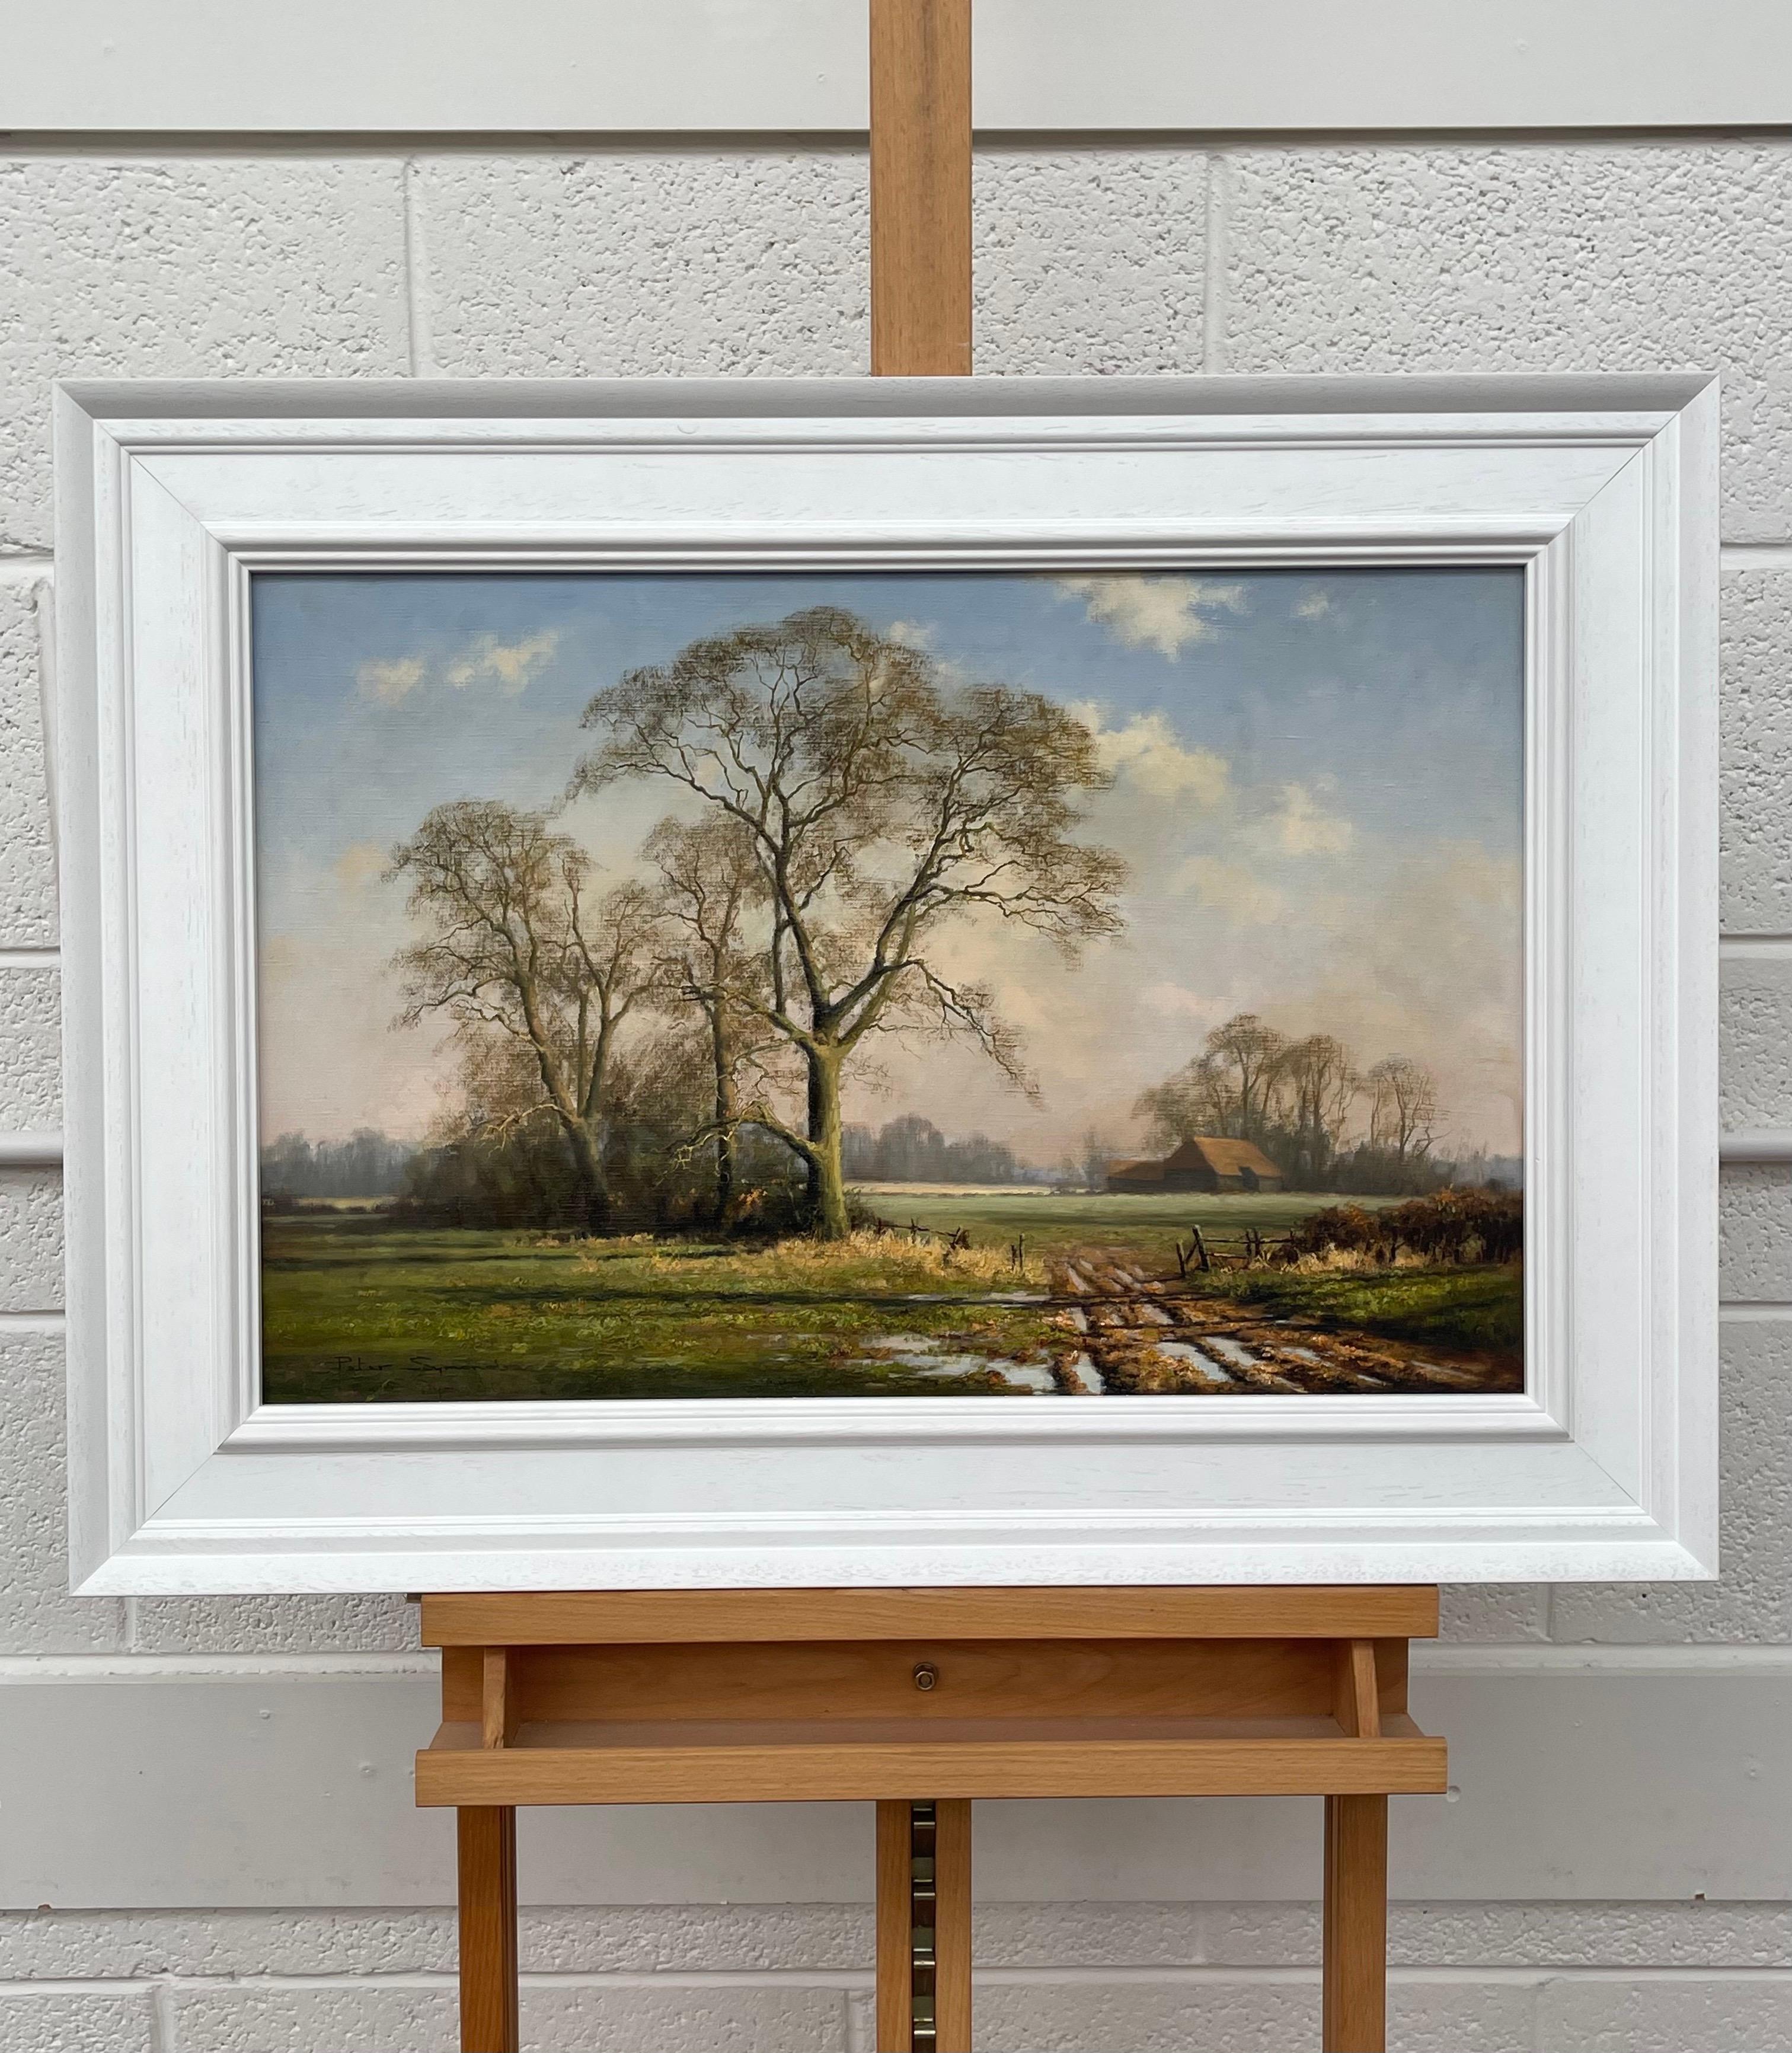 Oil Painting of Rural Winter Scene with Oak Trees in England by British Artist - Gray Landscape Painting by Peter Symonds